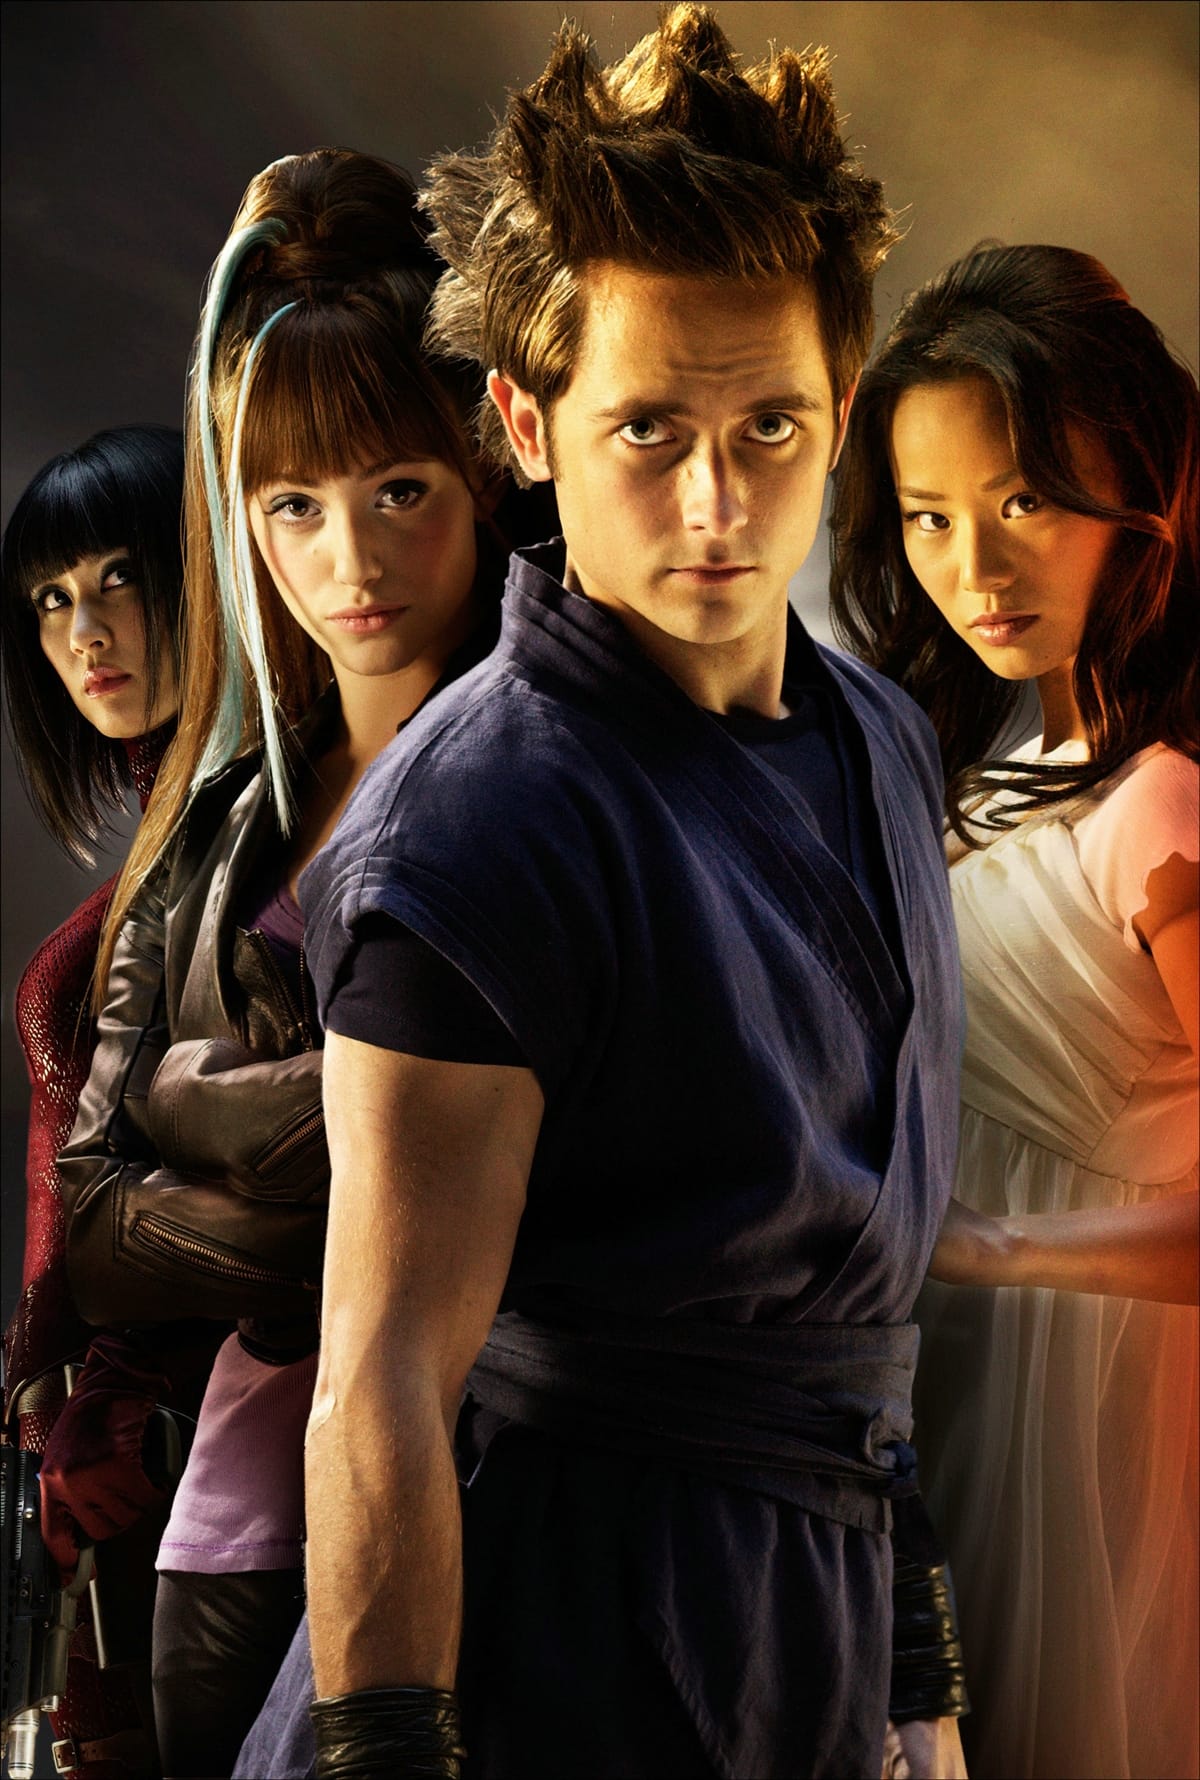 Emmy Rossum played the role of Bulma, Justin Chatwin played the role of Goku, Jamie Chung played the role of Chi-Chi, and Eriko Tamura played the role of Mai in "Dragonball: Evolution," a live-action adaptation of the popular manga and anime series "Dragon Ball"